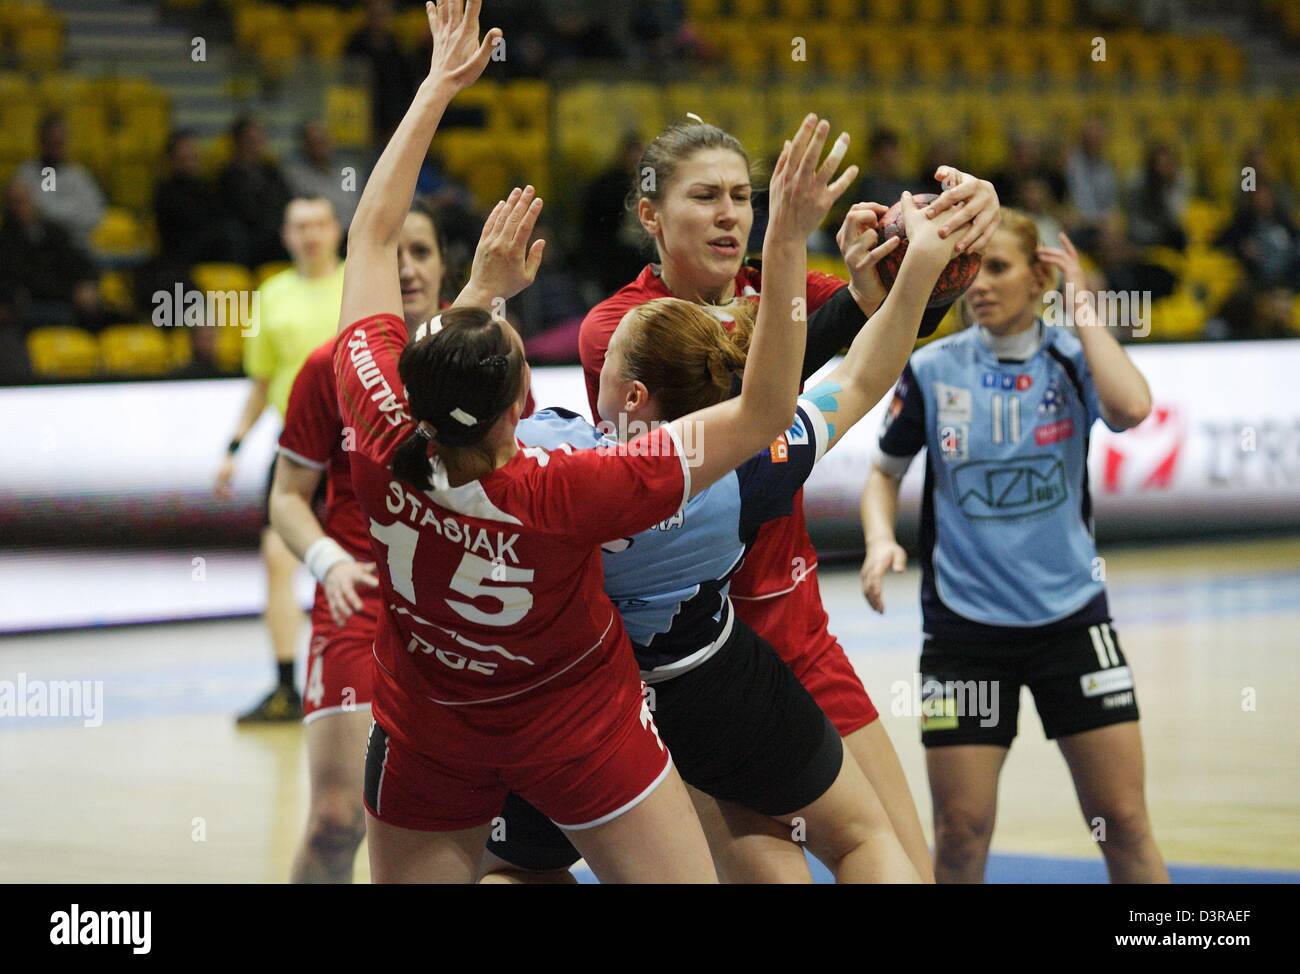 Gdynia, Poland 23rd, February 2013 Handball: Final Four of the PGNiG Polish Cup. SPR Lublin v KPR Ruch Chorzow game at HSW sports hall in Gdynia. Malgorzata Stasiak (15) in action during the game. Credit:  Michal Fludra / Alamy Live News Stock Photo